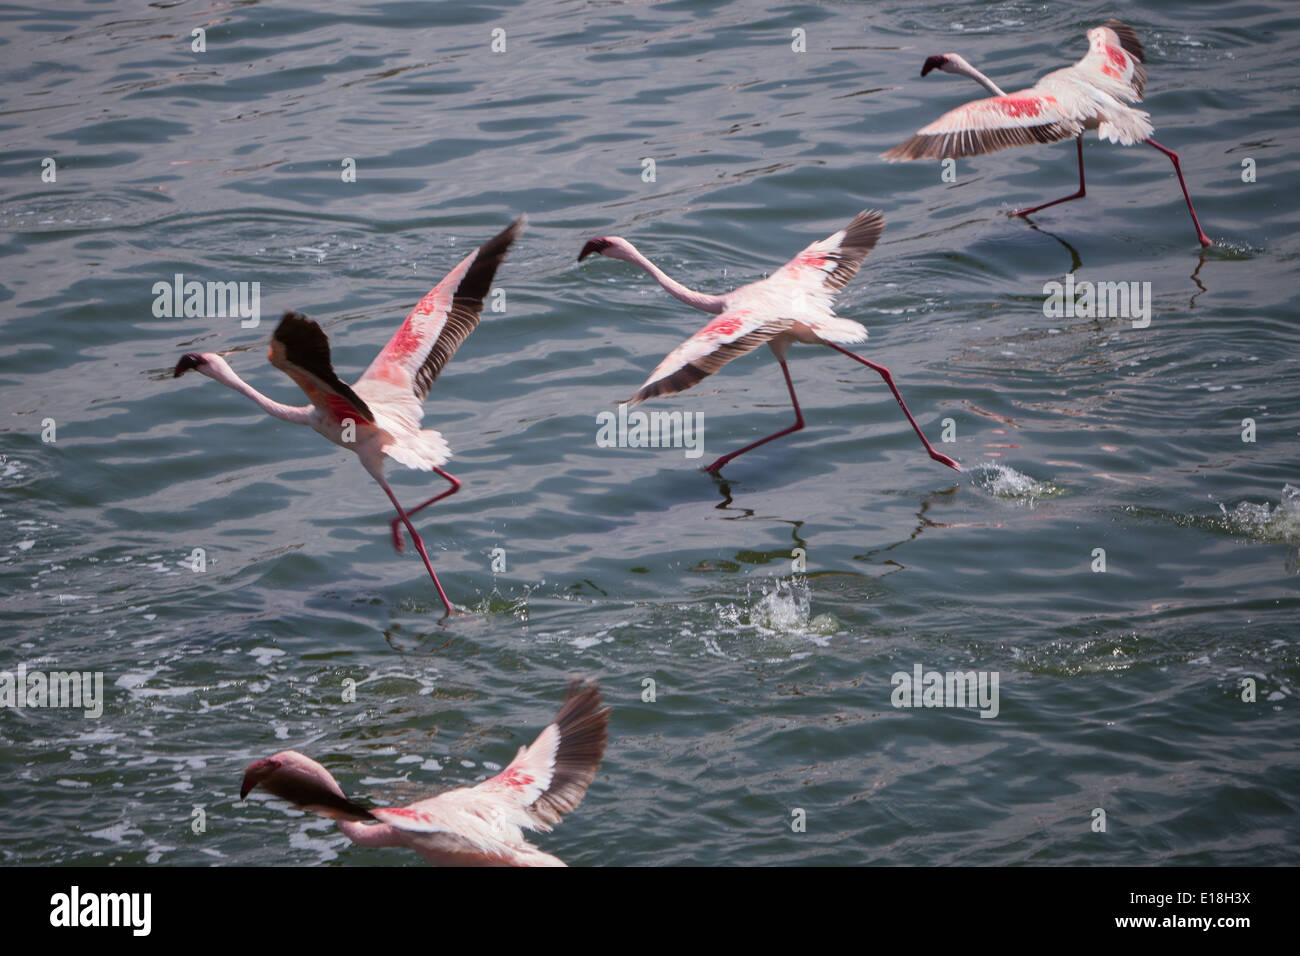 Flamingos appear to walk on water at Arusha National Park, Tanzania, East Africa. Stock Photo